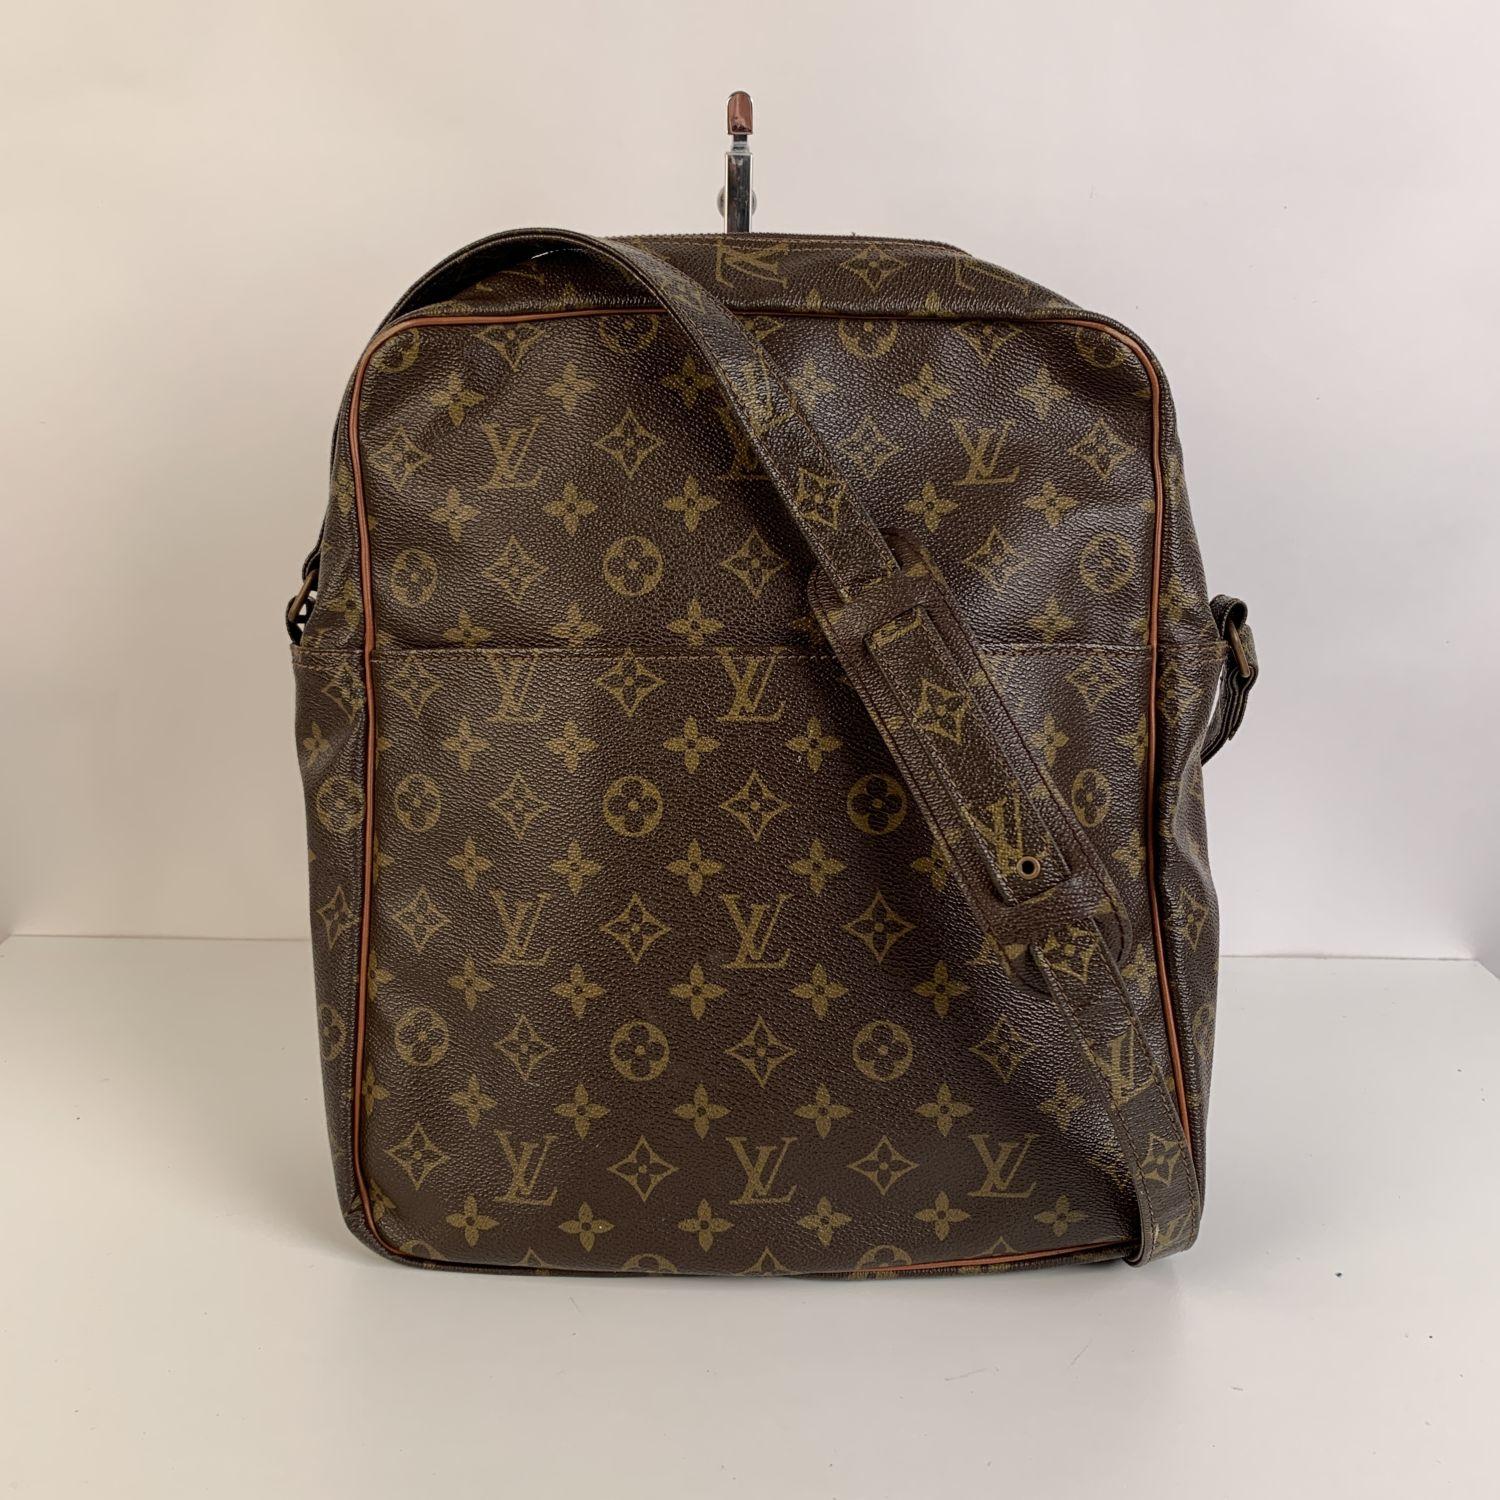 LOUIS VUITTON Vintage monogram canvas Marceau GM crafted in timeless monogram canvas with leather trim. It features 1 large open pocket on the front. Adjustable canvas shoulder strap. Upper zip closure. Leather lining. 'LOUIS VUITTON Paris - made in